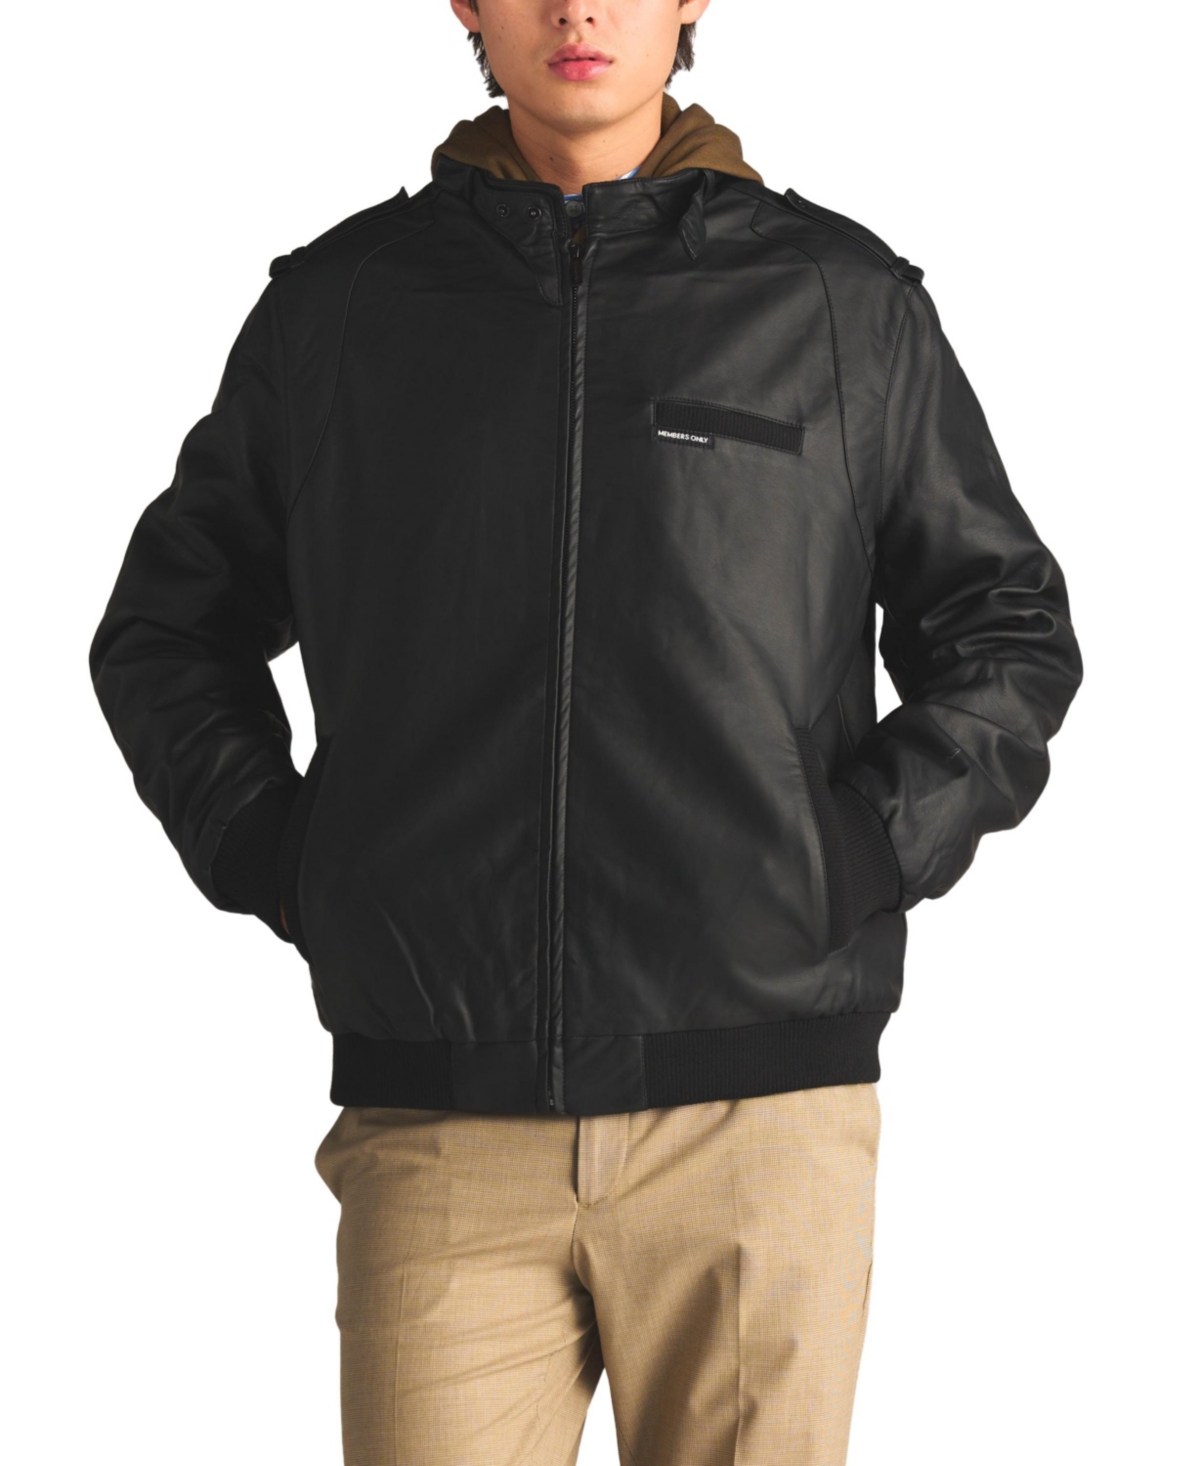 Members Only Tom & Jerry Graphic Windbreaker in Black for Men